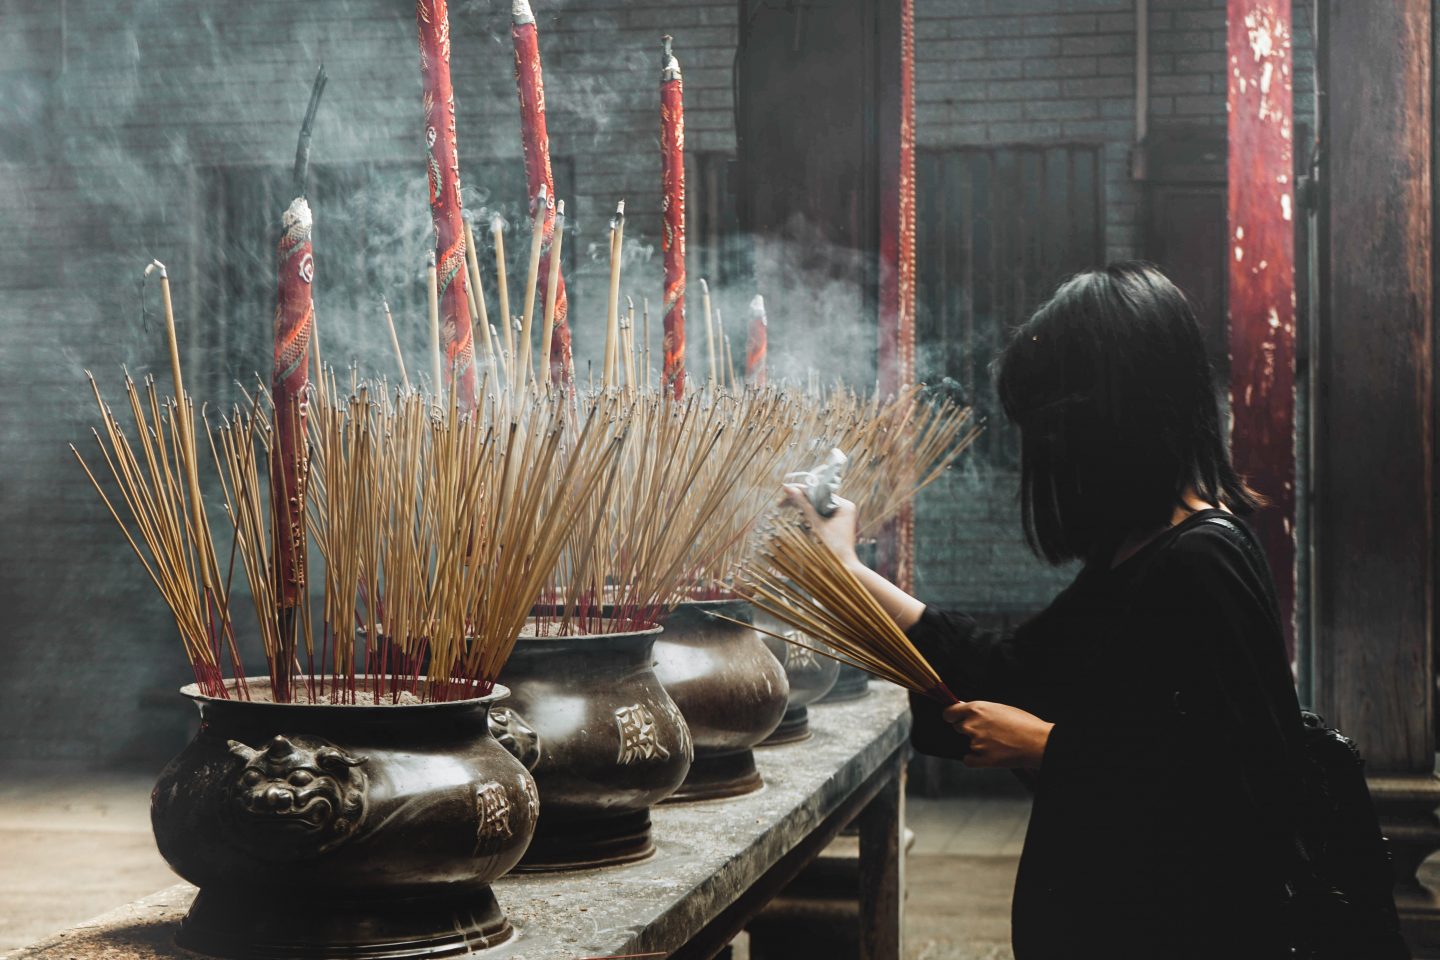 A woman praying in a temple with incense.